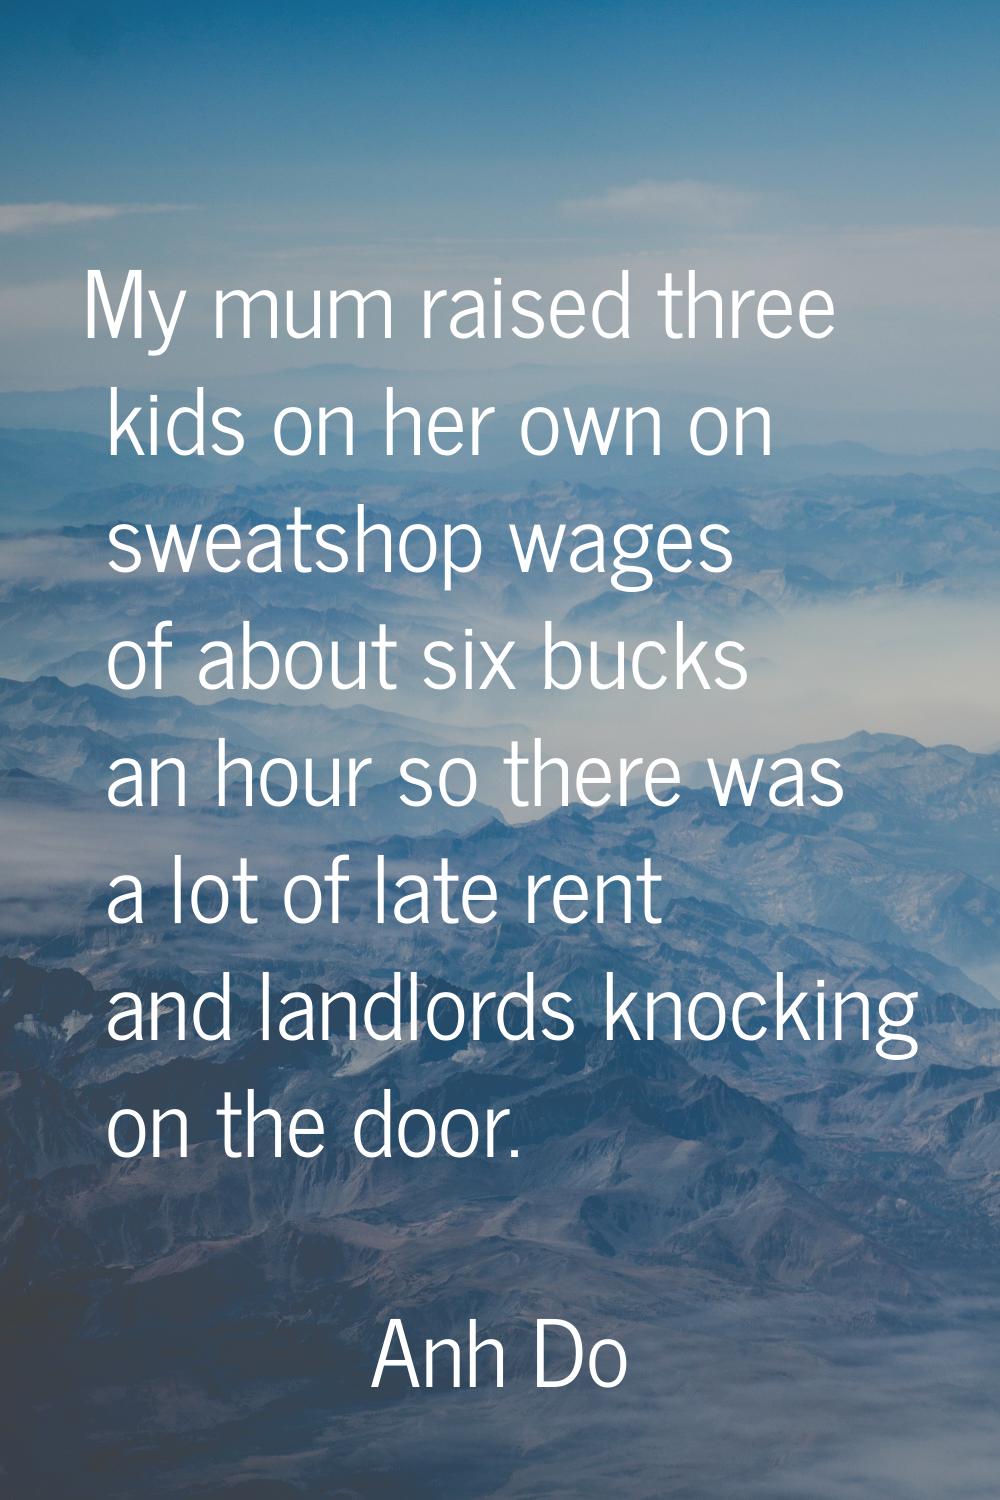 My mum raised three kids on her own on sweatshop wages of about six bucks an hour so there was a lo